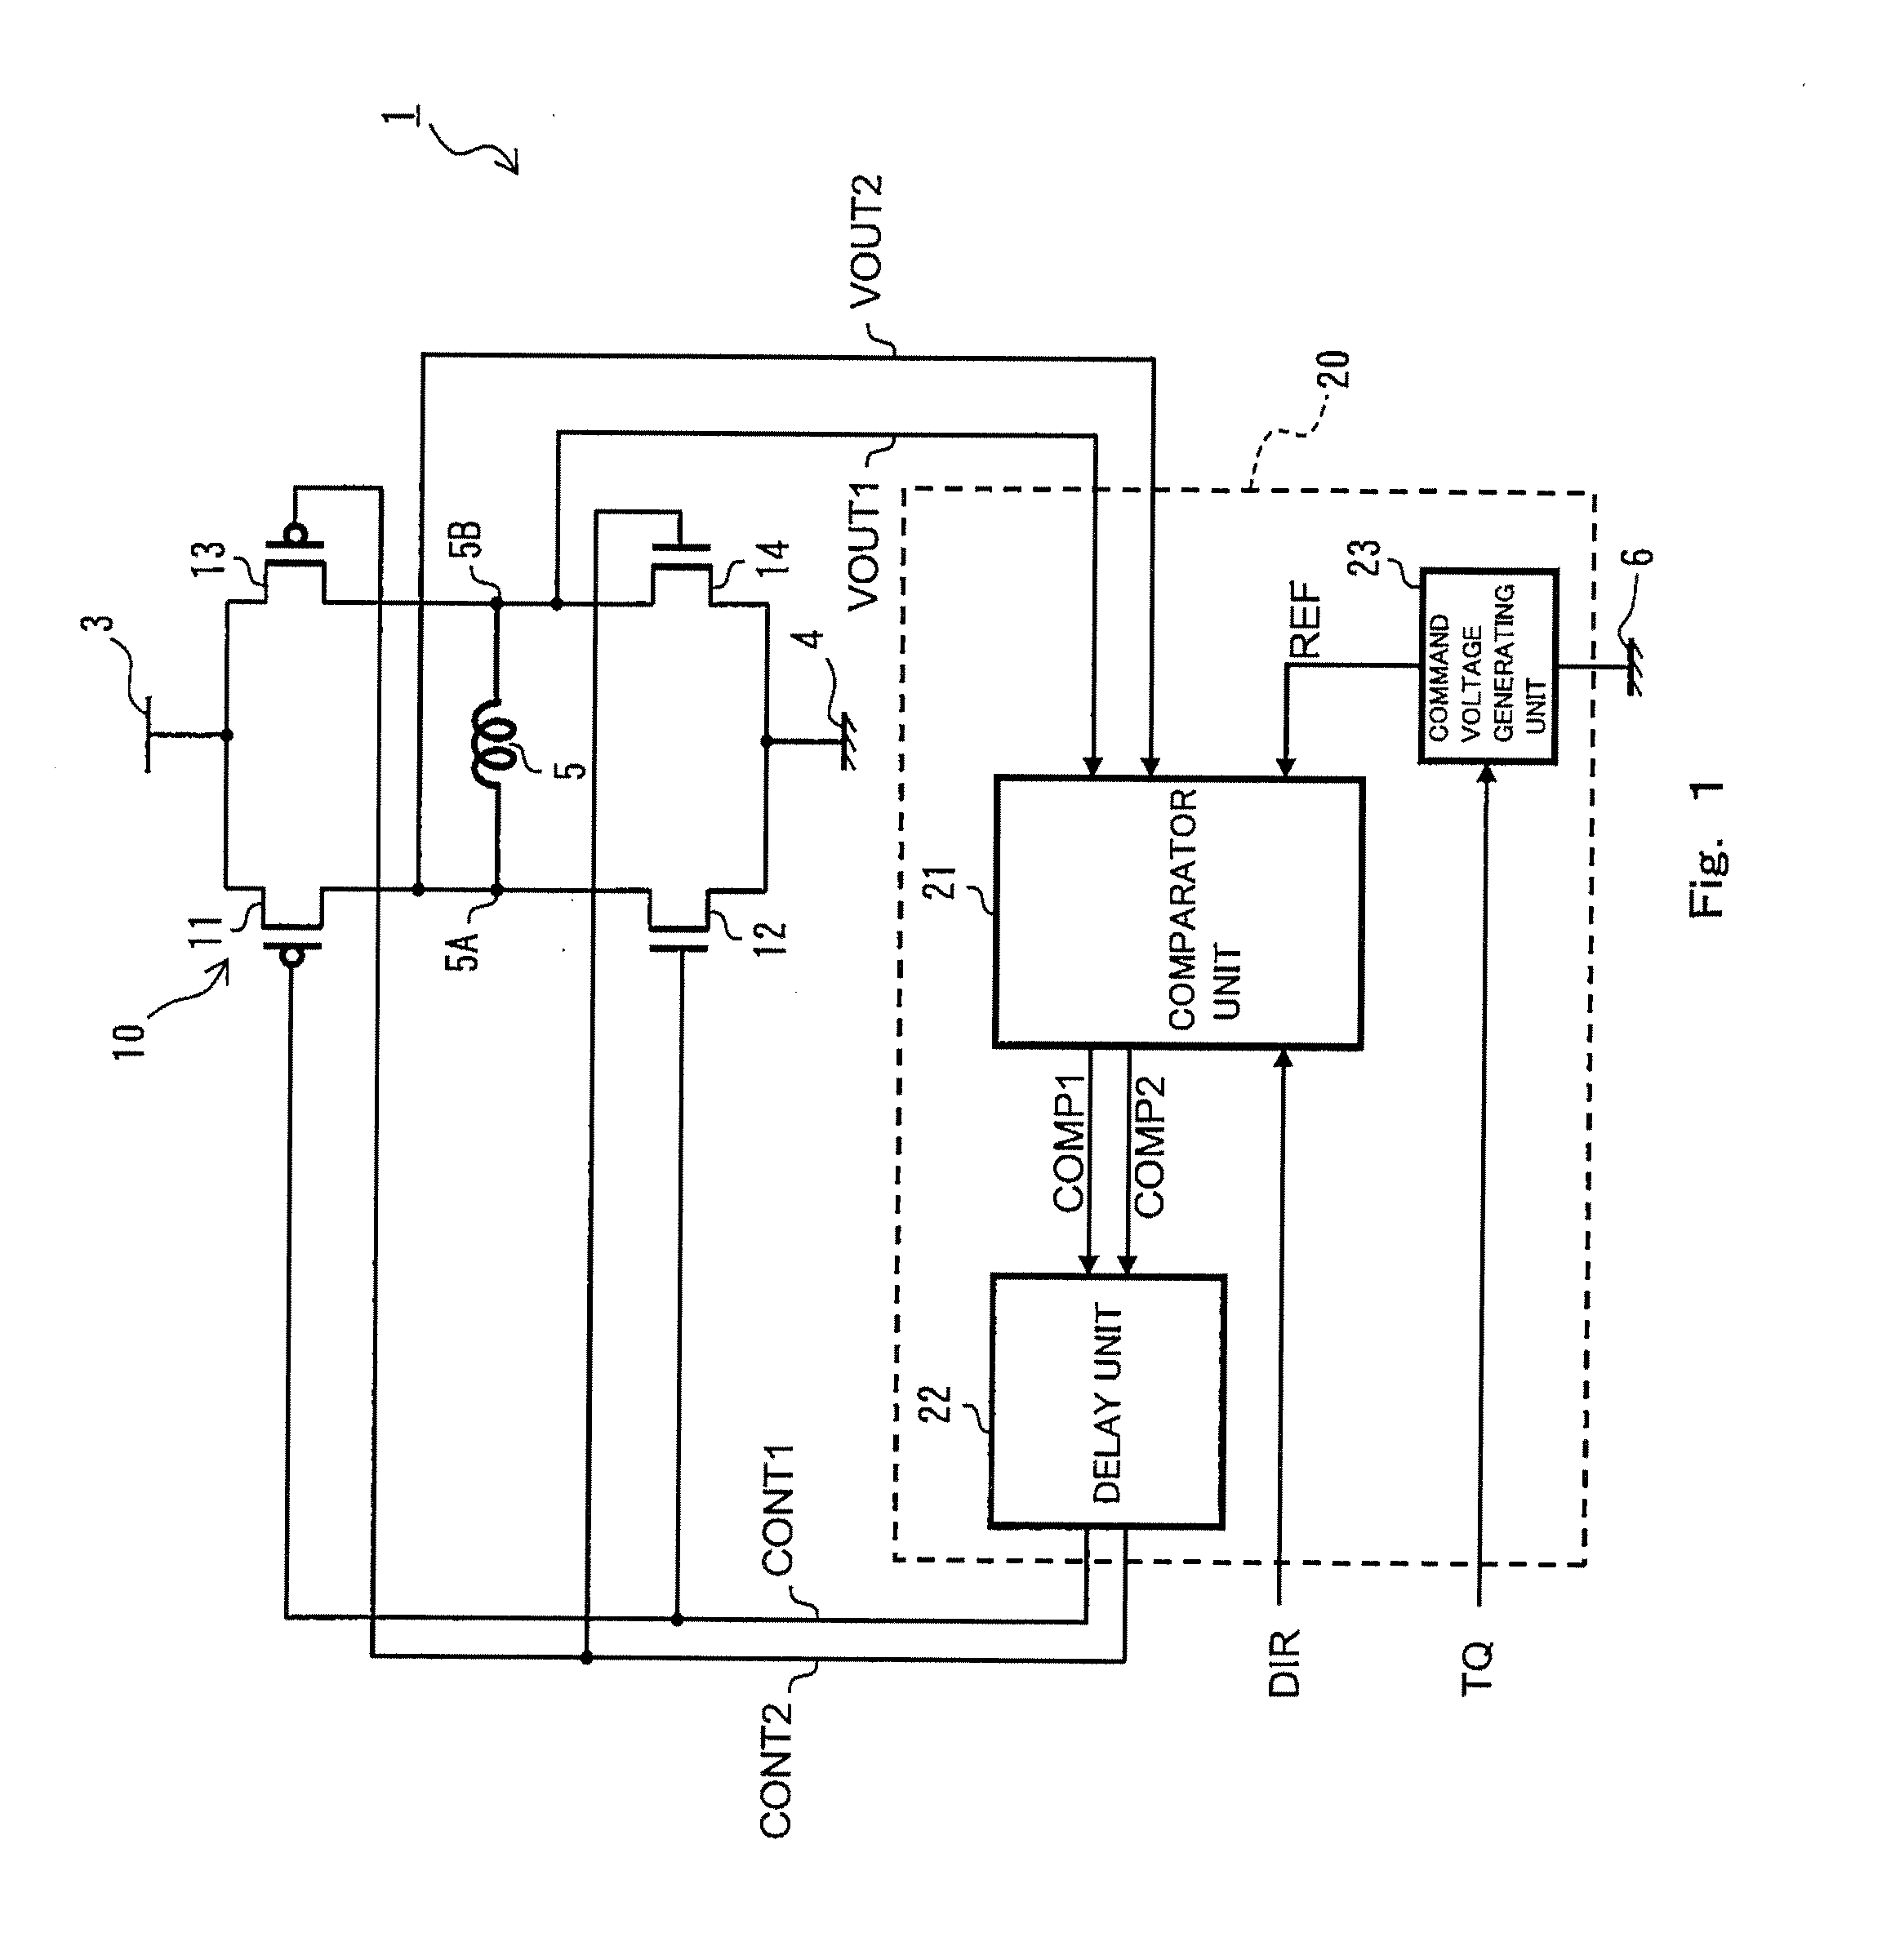 Induction load driving system